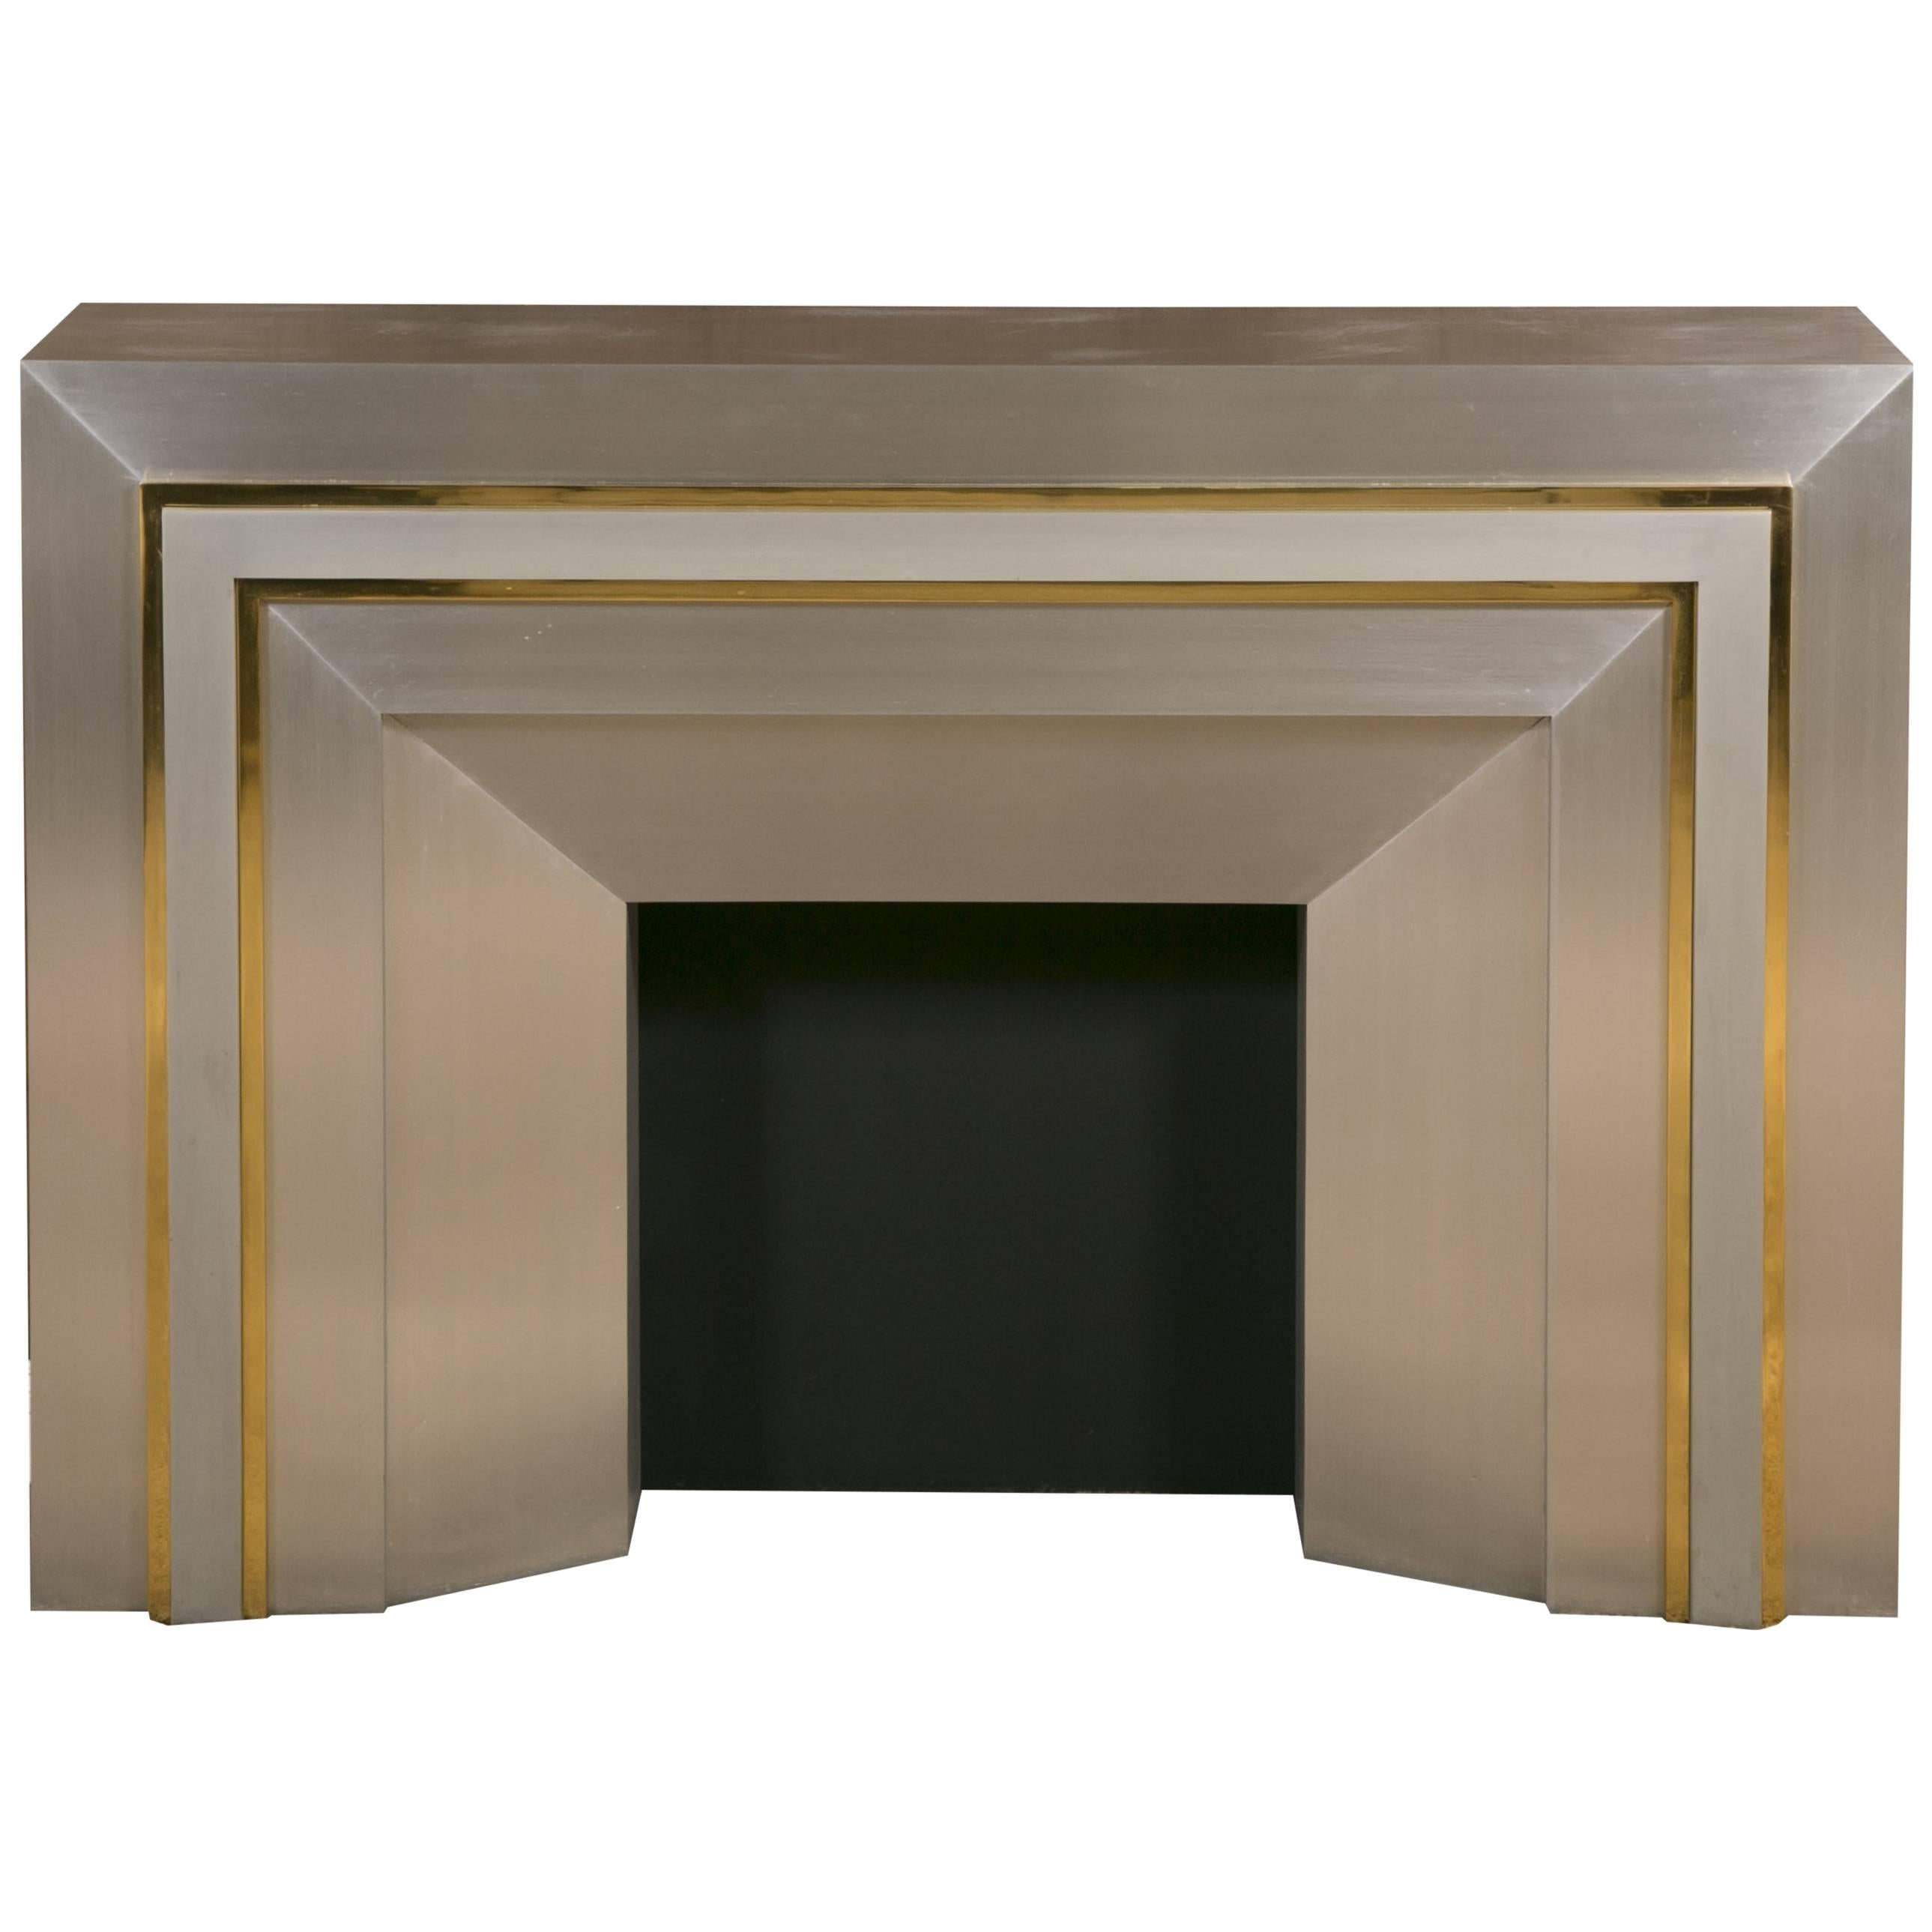 Decorative Metal and Brass Fire Mantel